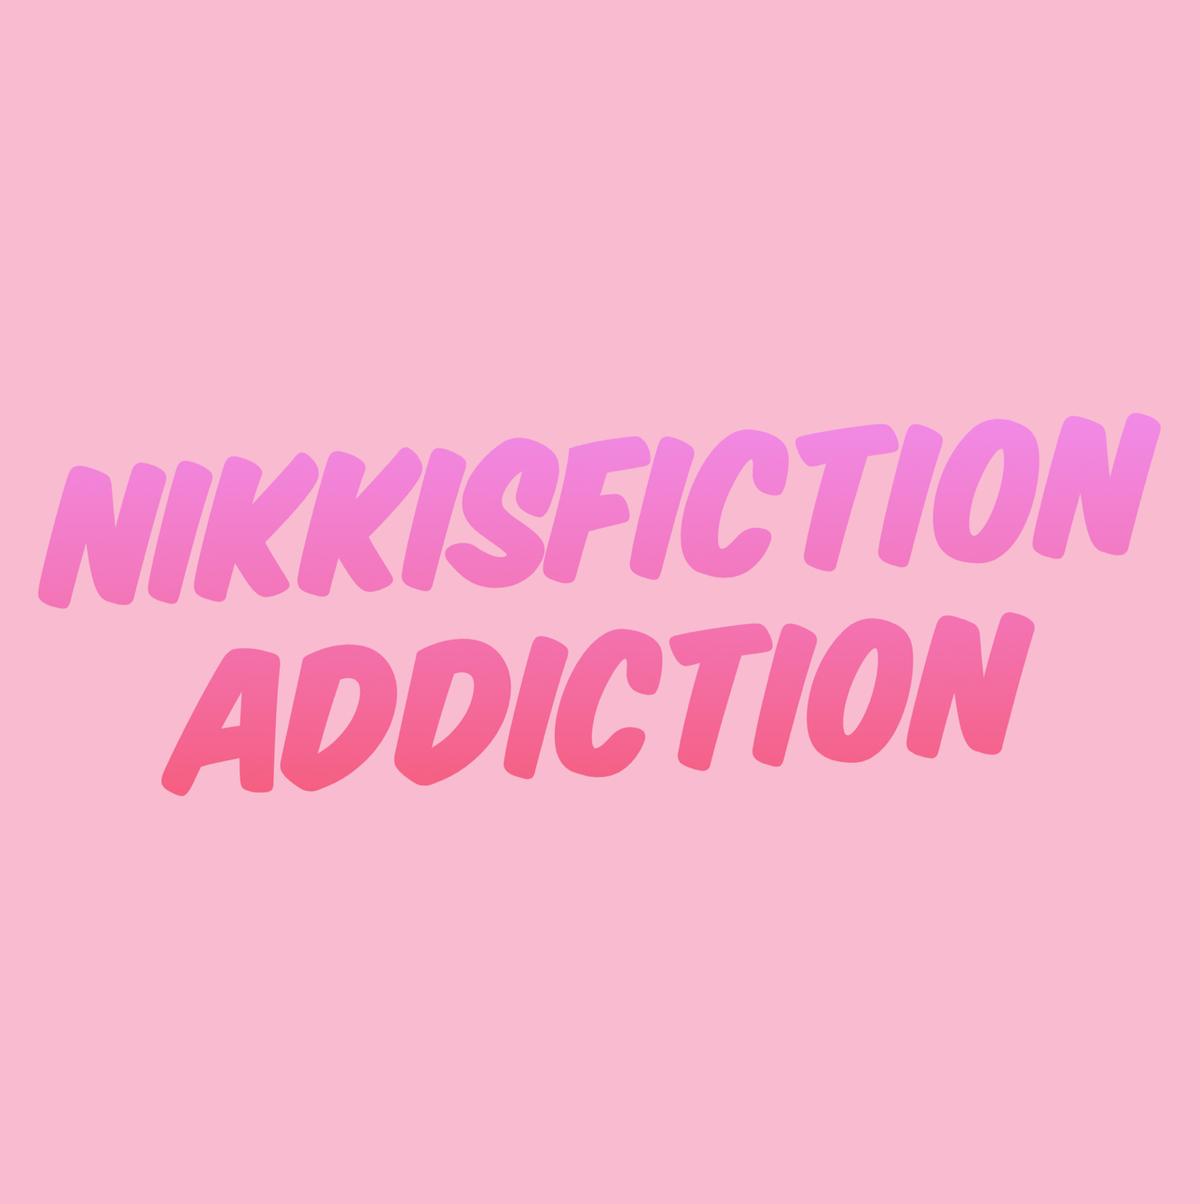 Nikkisfiction's images